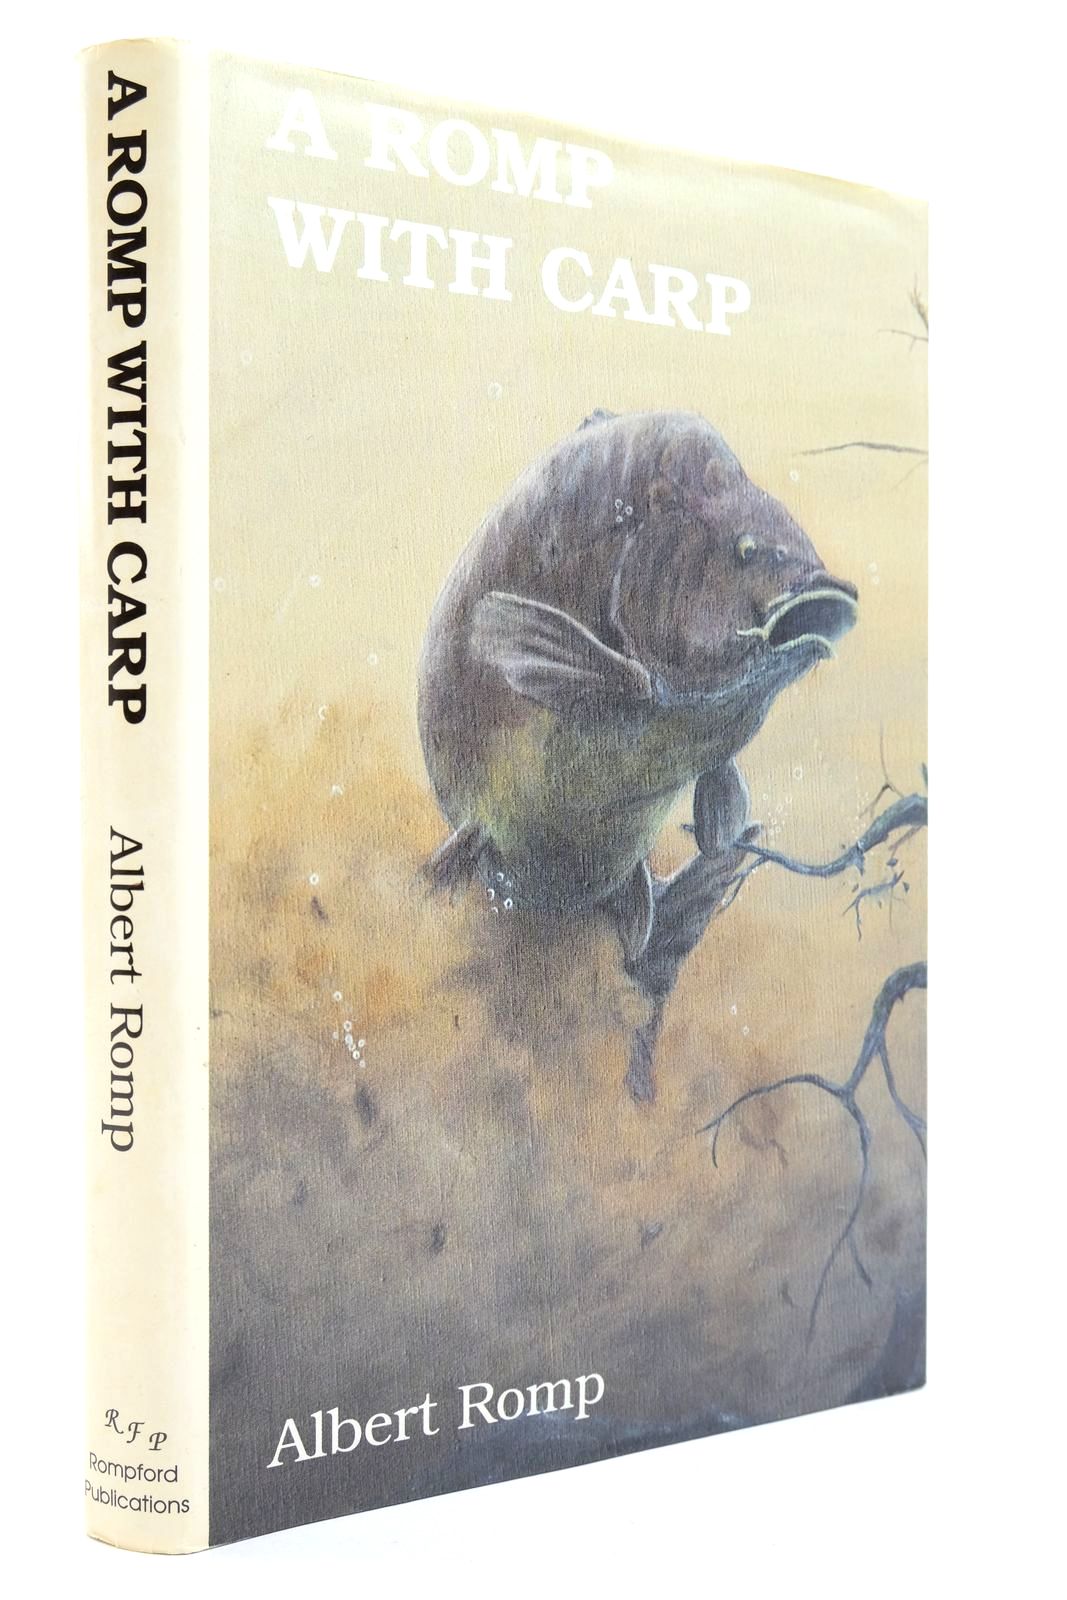 Photo of A ROMP WITH CARP written by Romp, Albert published by Rompford Publications (STOCK CODE: 2139671)  for sale by Stella & Rose's Books